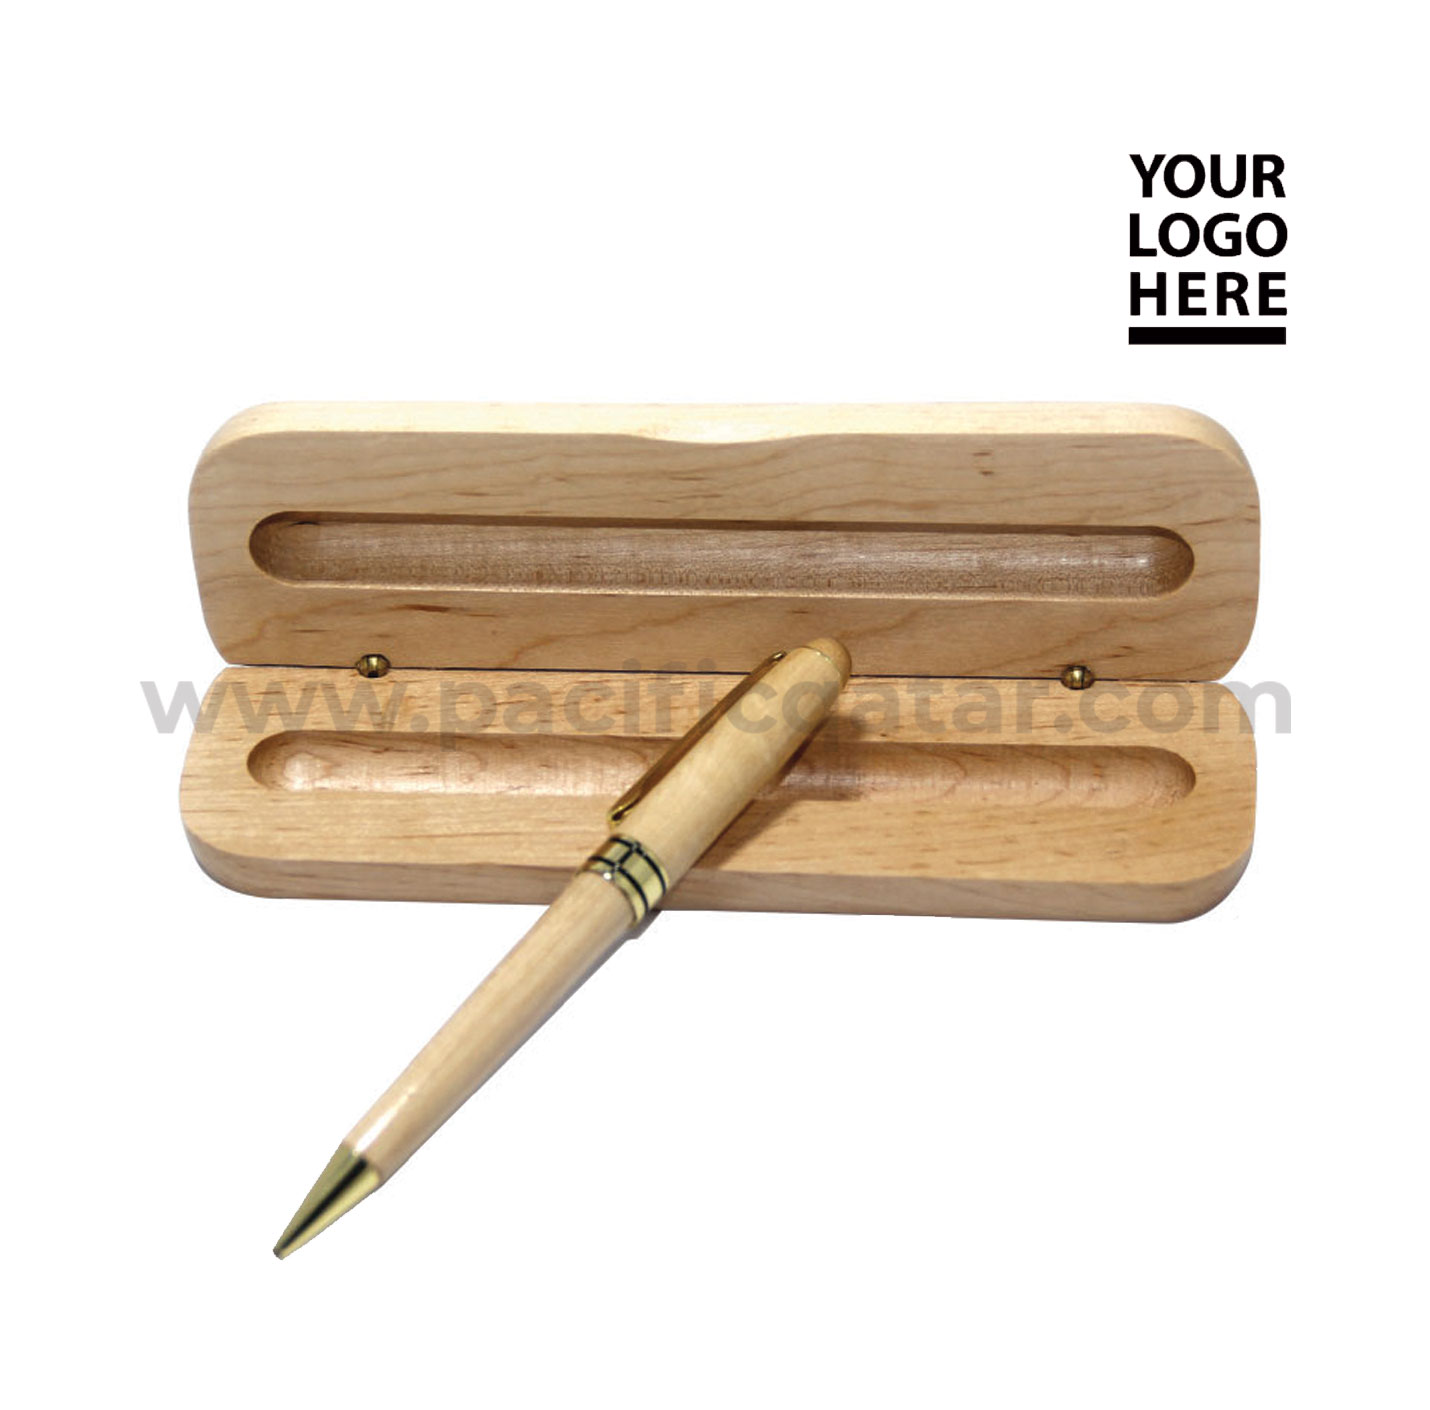 Wooden pen and case